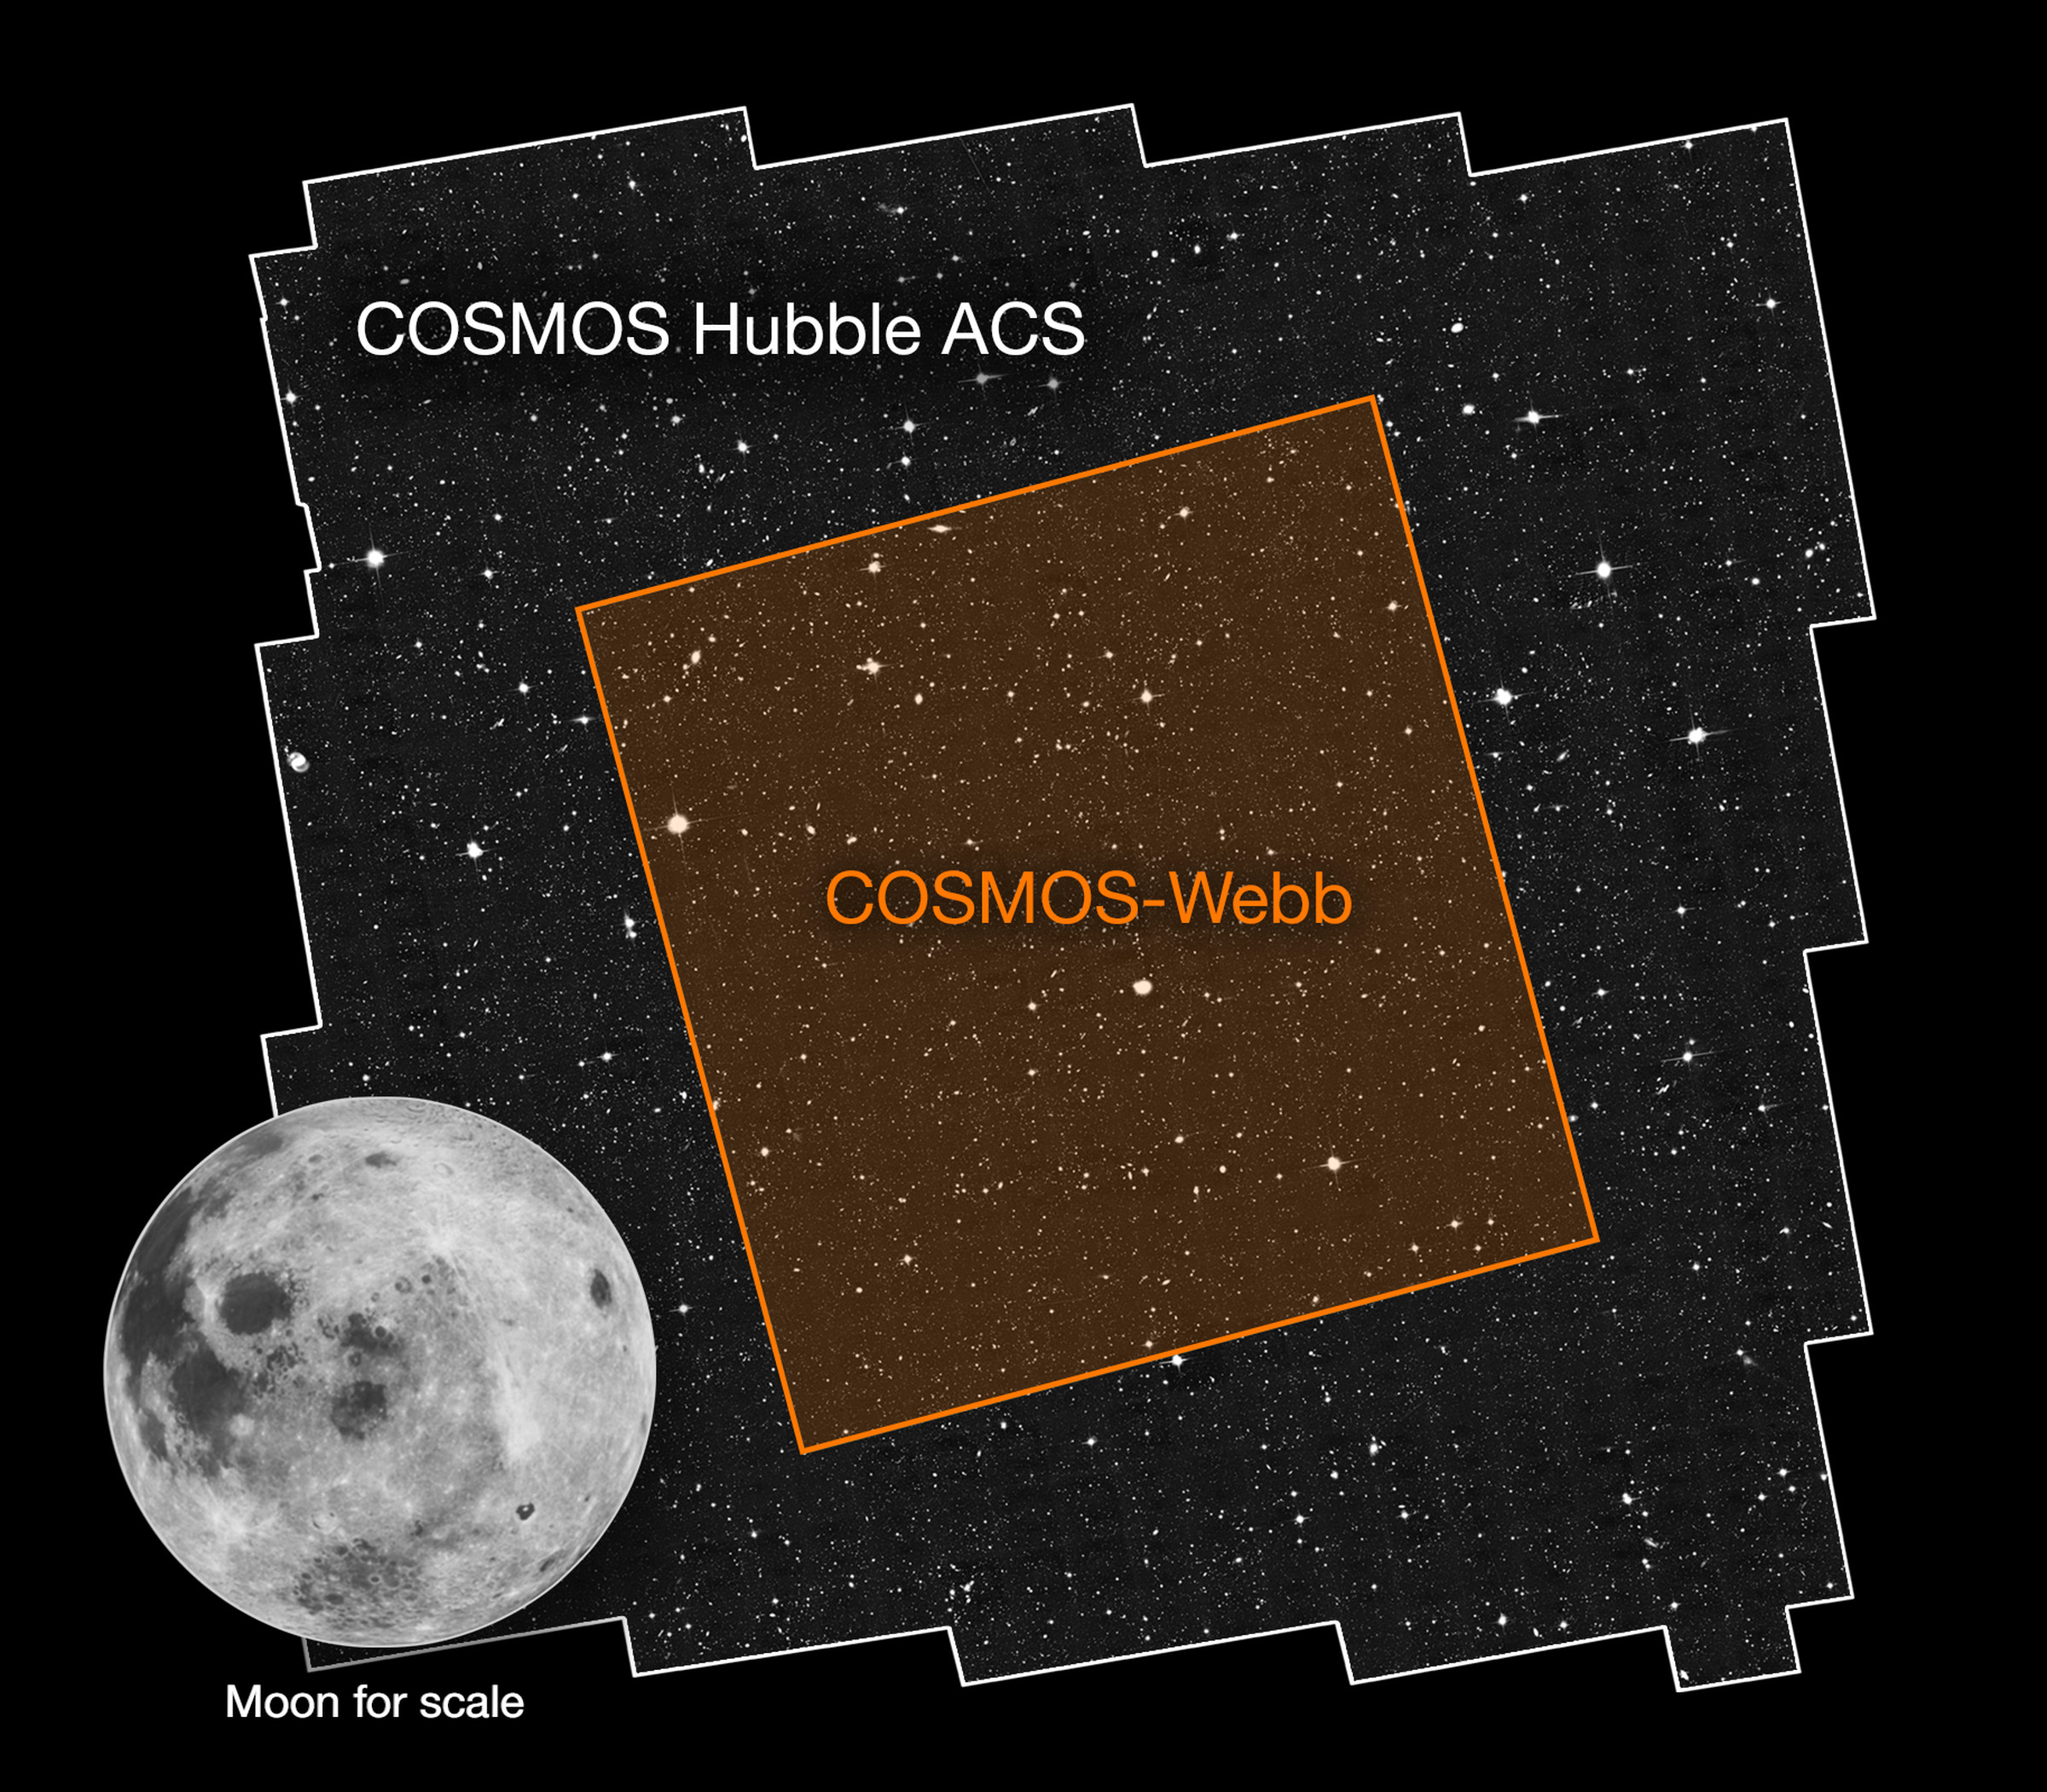 The area of sky that COSMOS-Web will cover, compared to the full Moon and COSMOS Hubble, which surveyed a larger patch of sky starting in 2002.